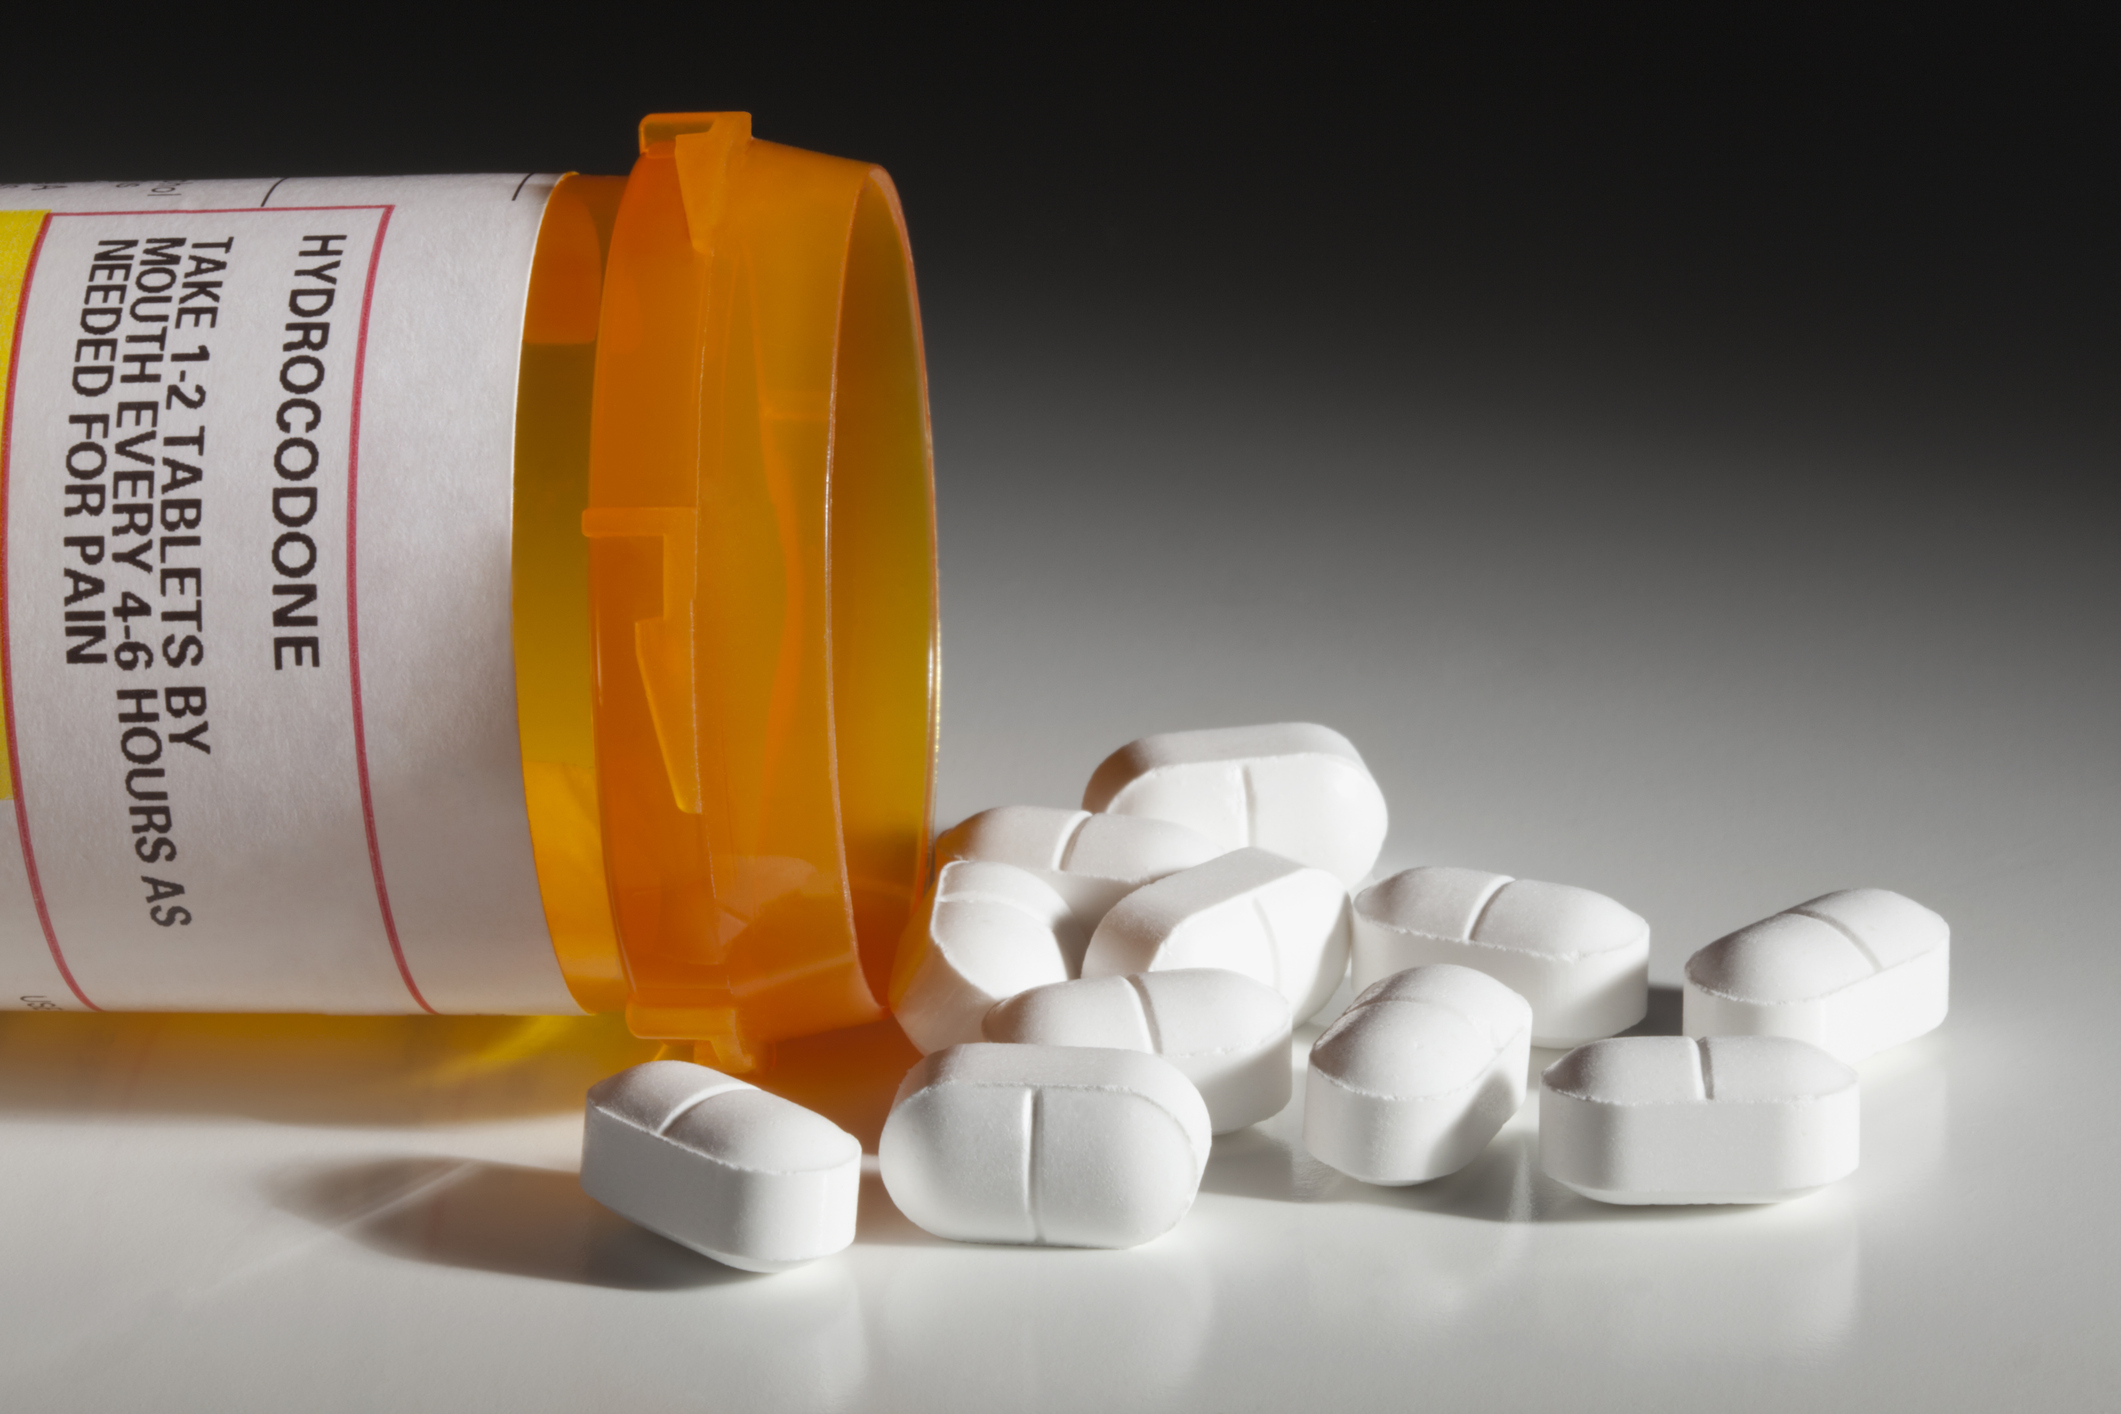 Opioid Lawsuits Heading To Centralized Multidistrict Litigation Mdl 2804 — North Carolina